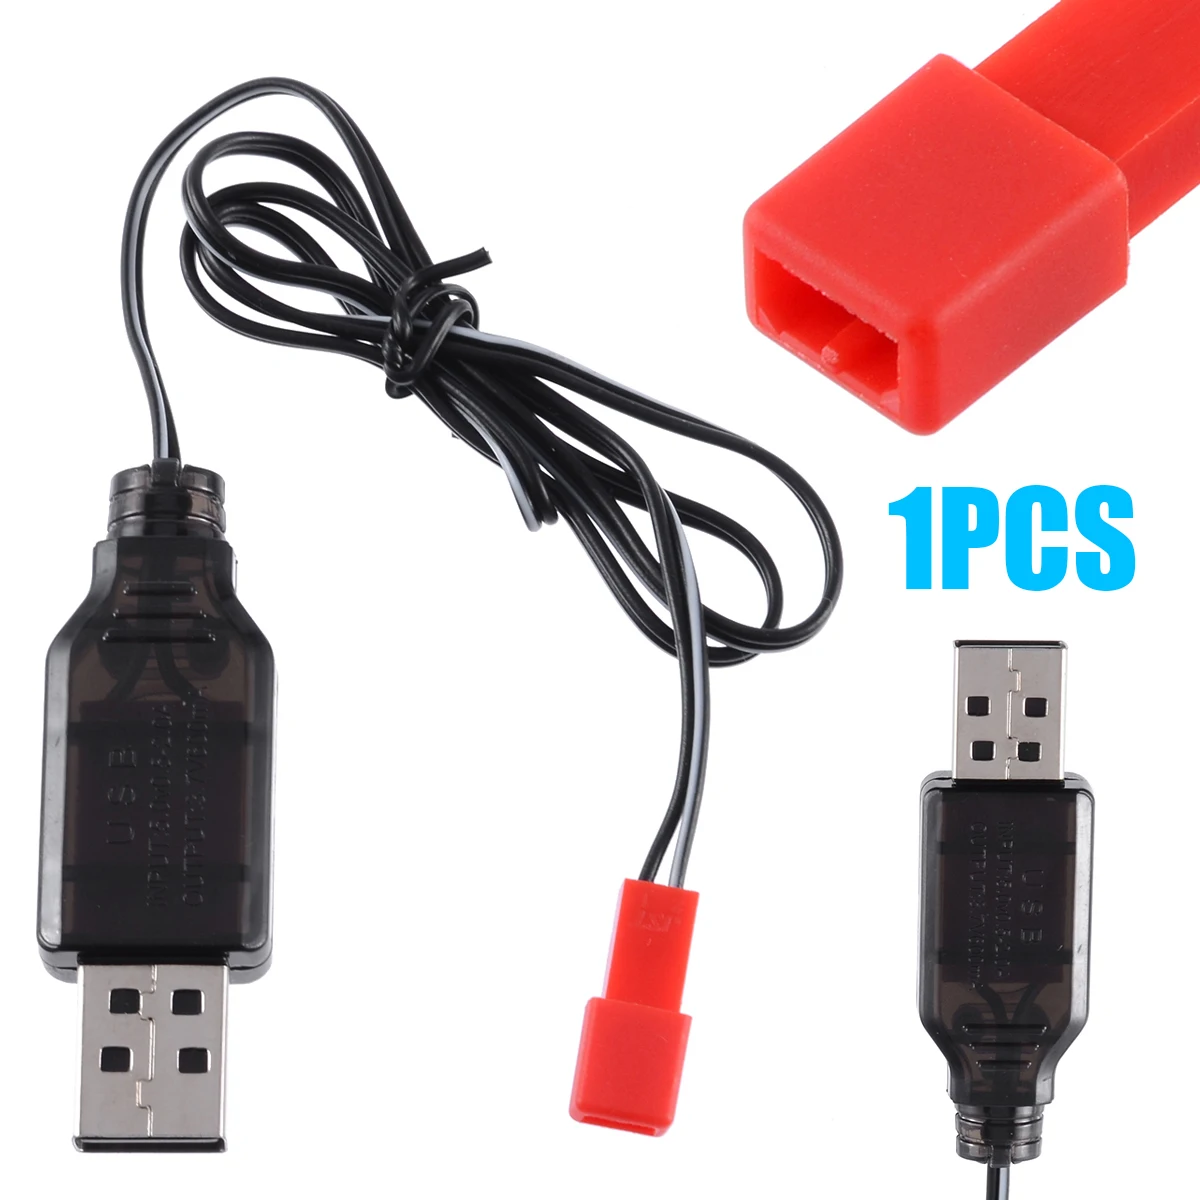 1/2pcs Sky Viper Drone USB Charger Cable For s670 v950HD v950 STR s1700 V2400HD 